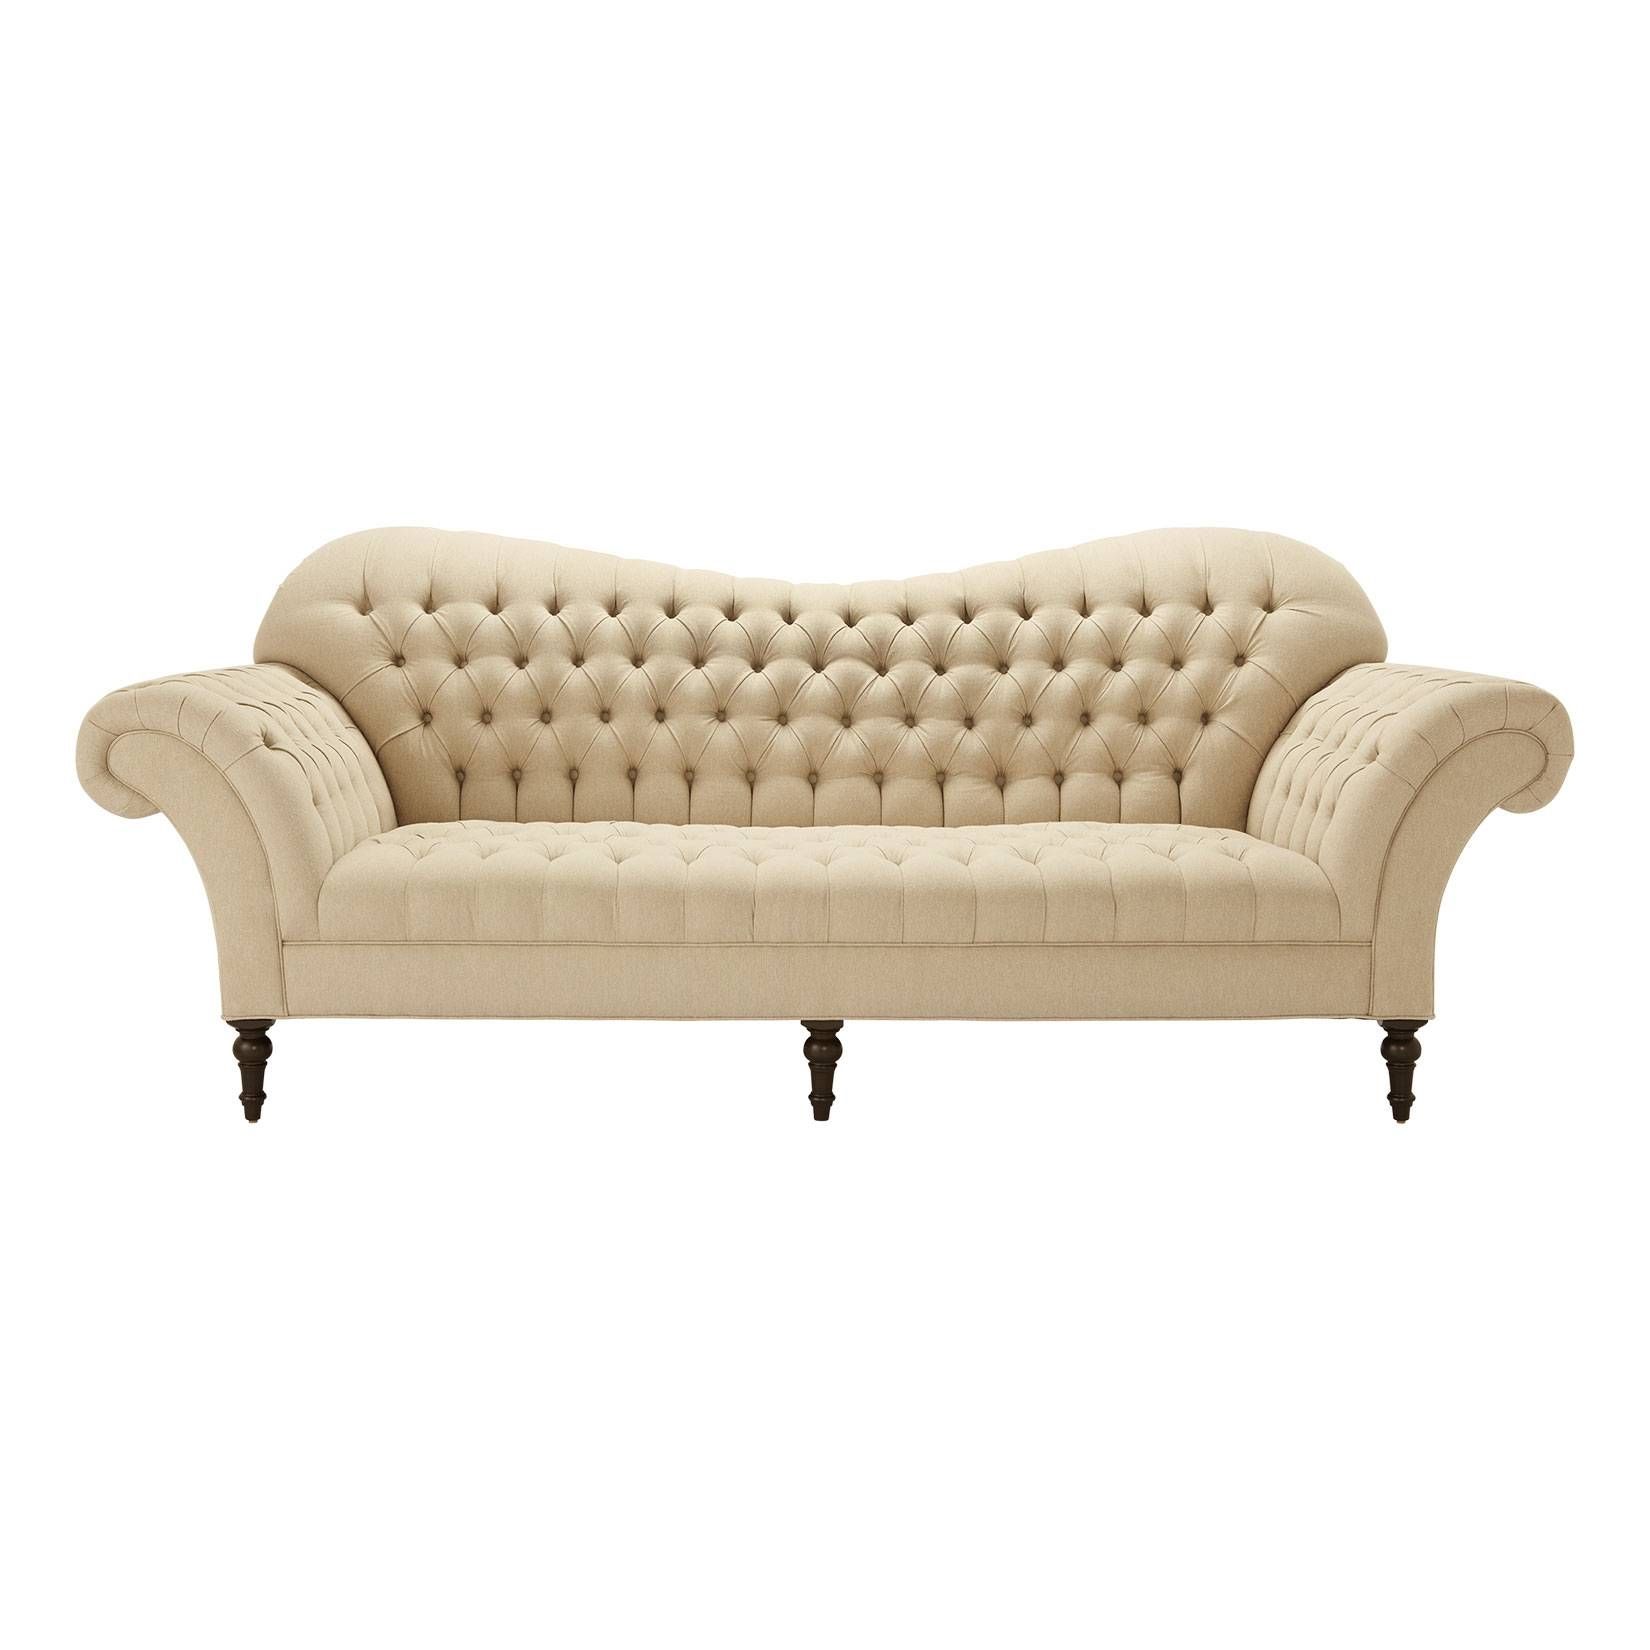 Furniture: Luxury Curved Sectional Sofa For Living Room Furniture Pertaining To Affordable Tufted Sofa (View 29 of 30)